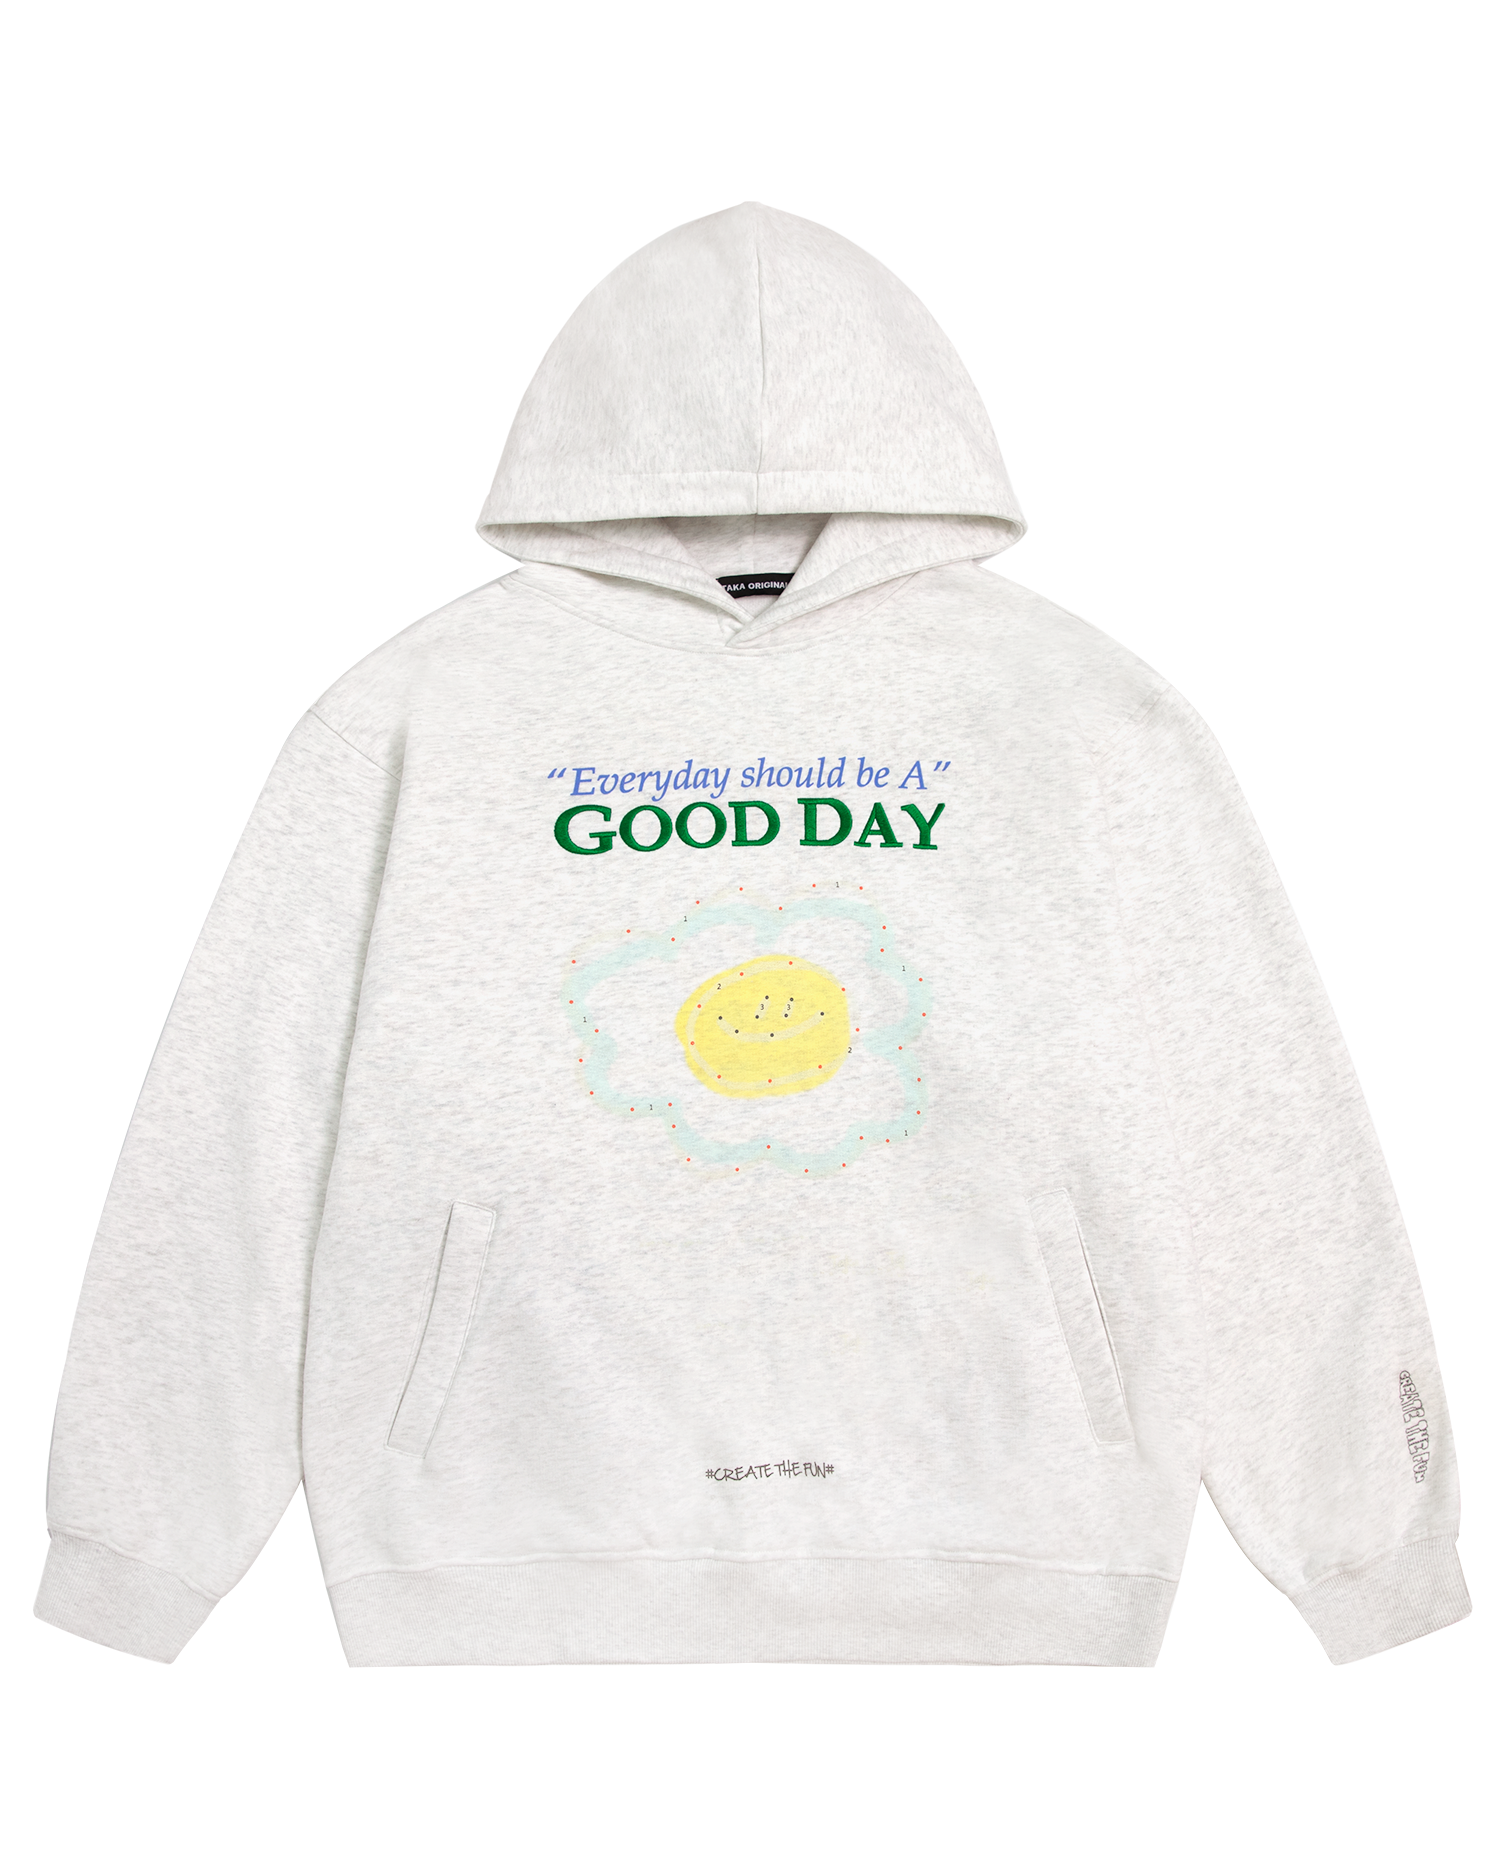 TAKA Original HOME collection draw it yourself Daisy hoodie